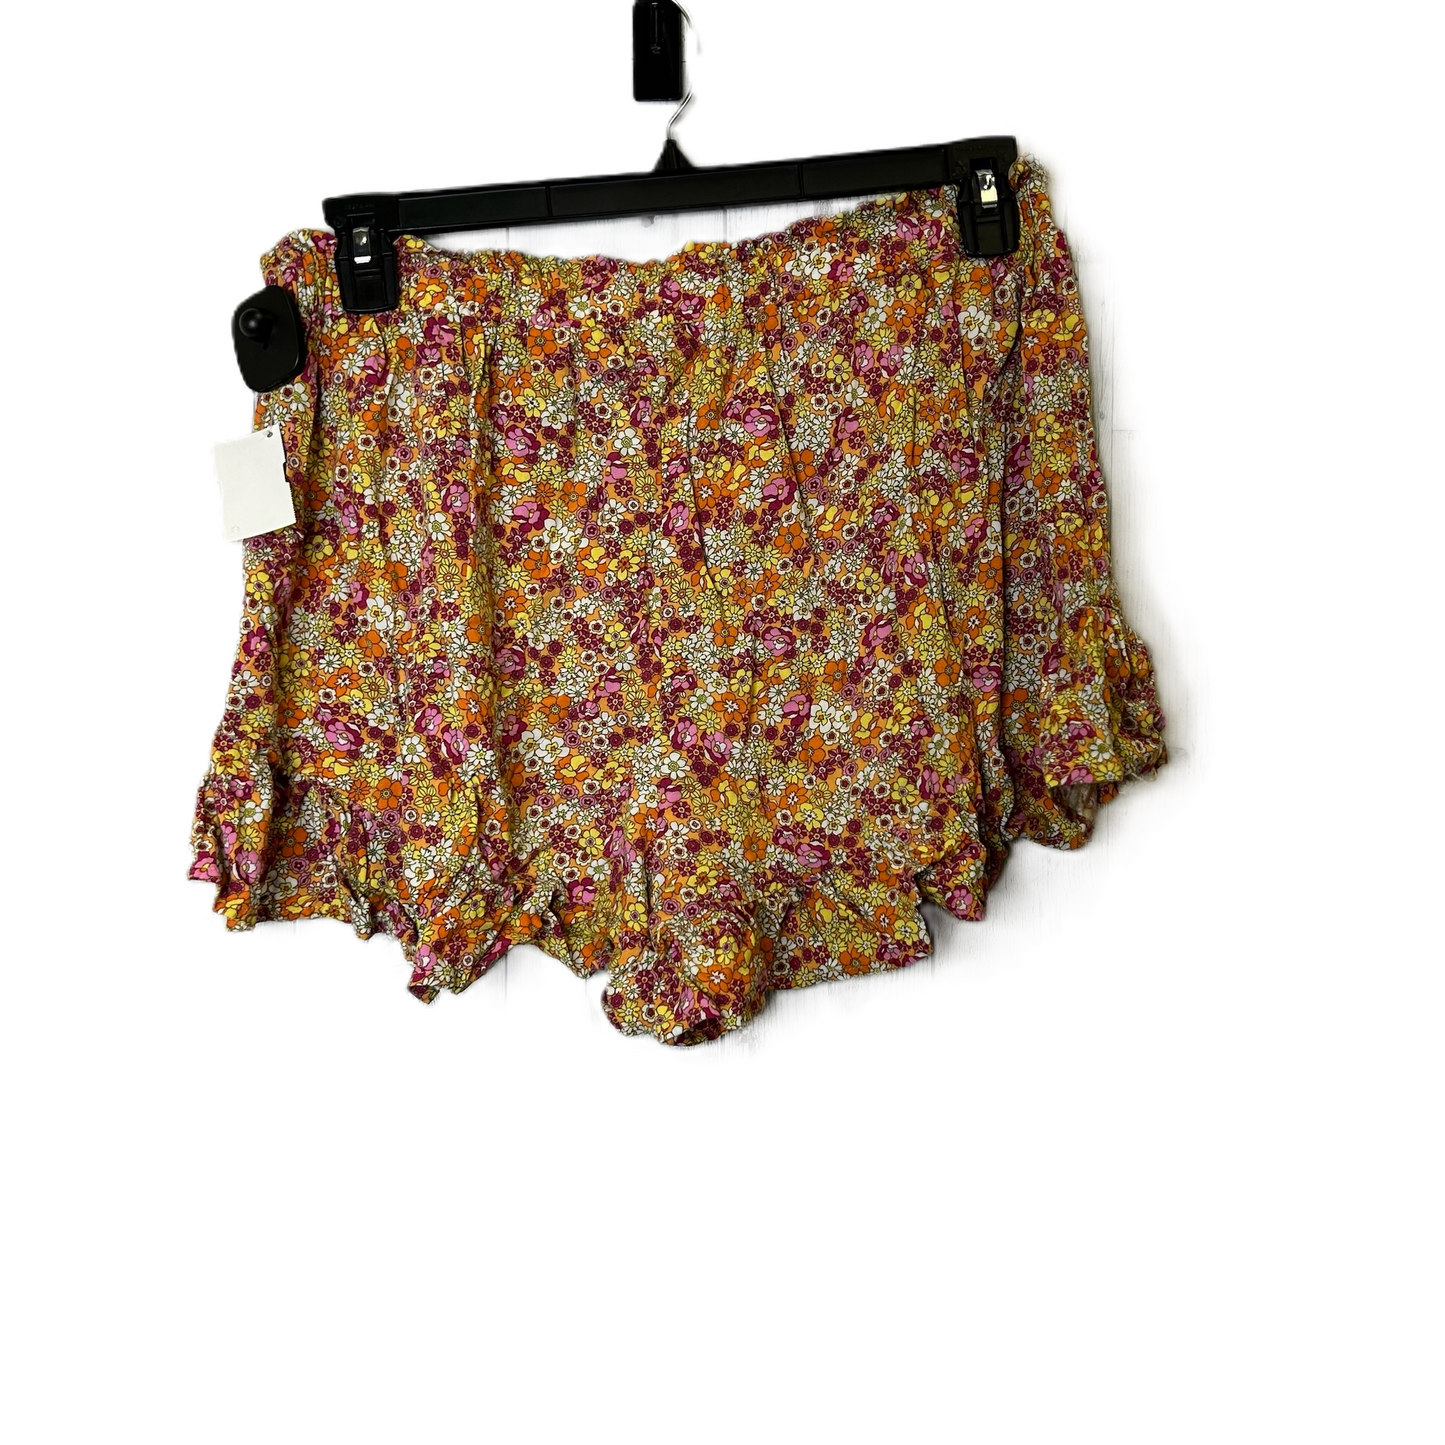 Shorts By Wild Fable  Size: L